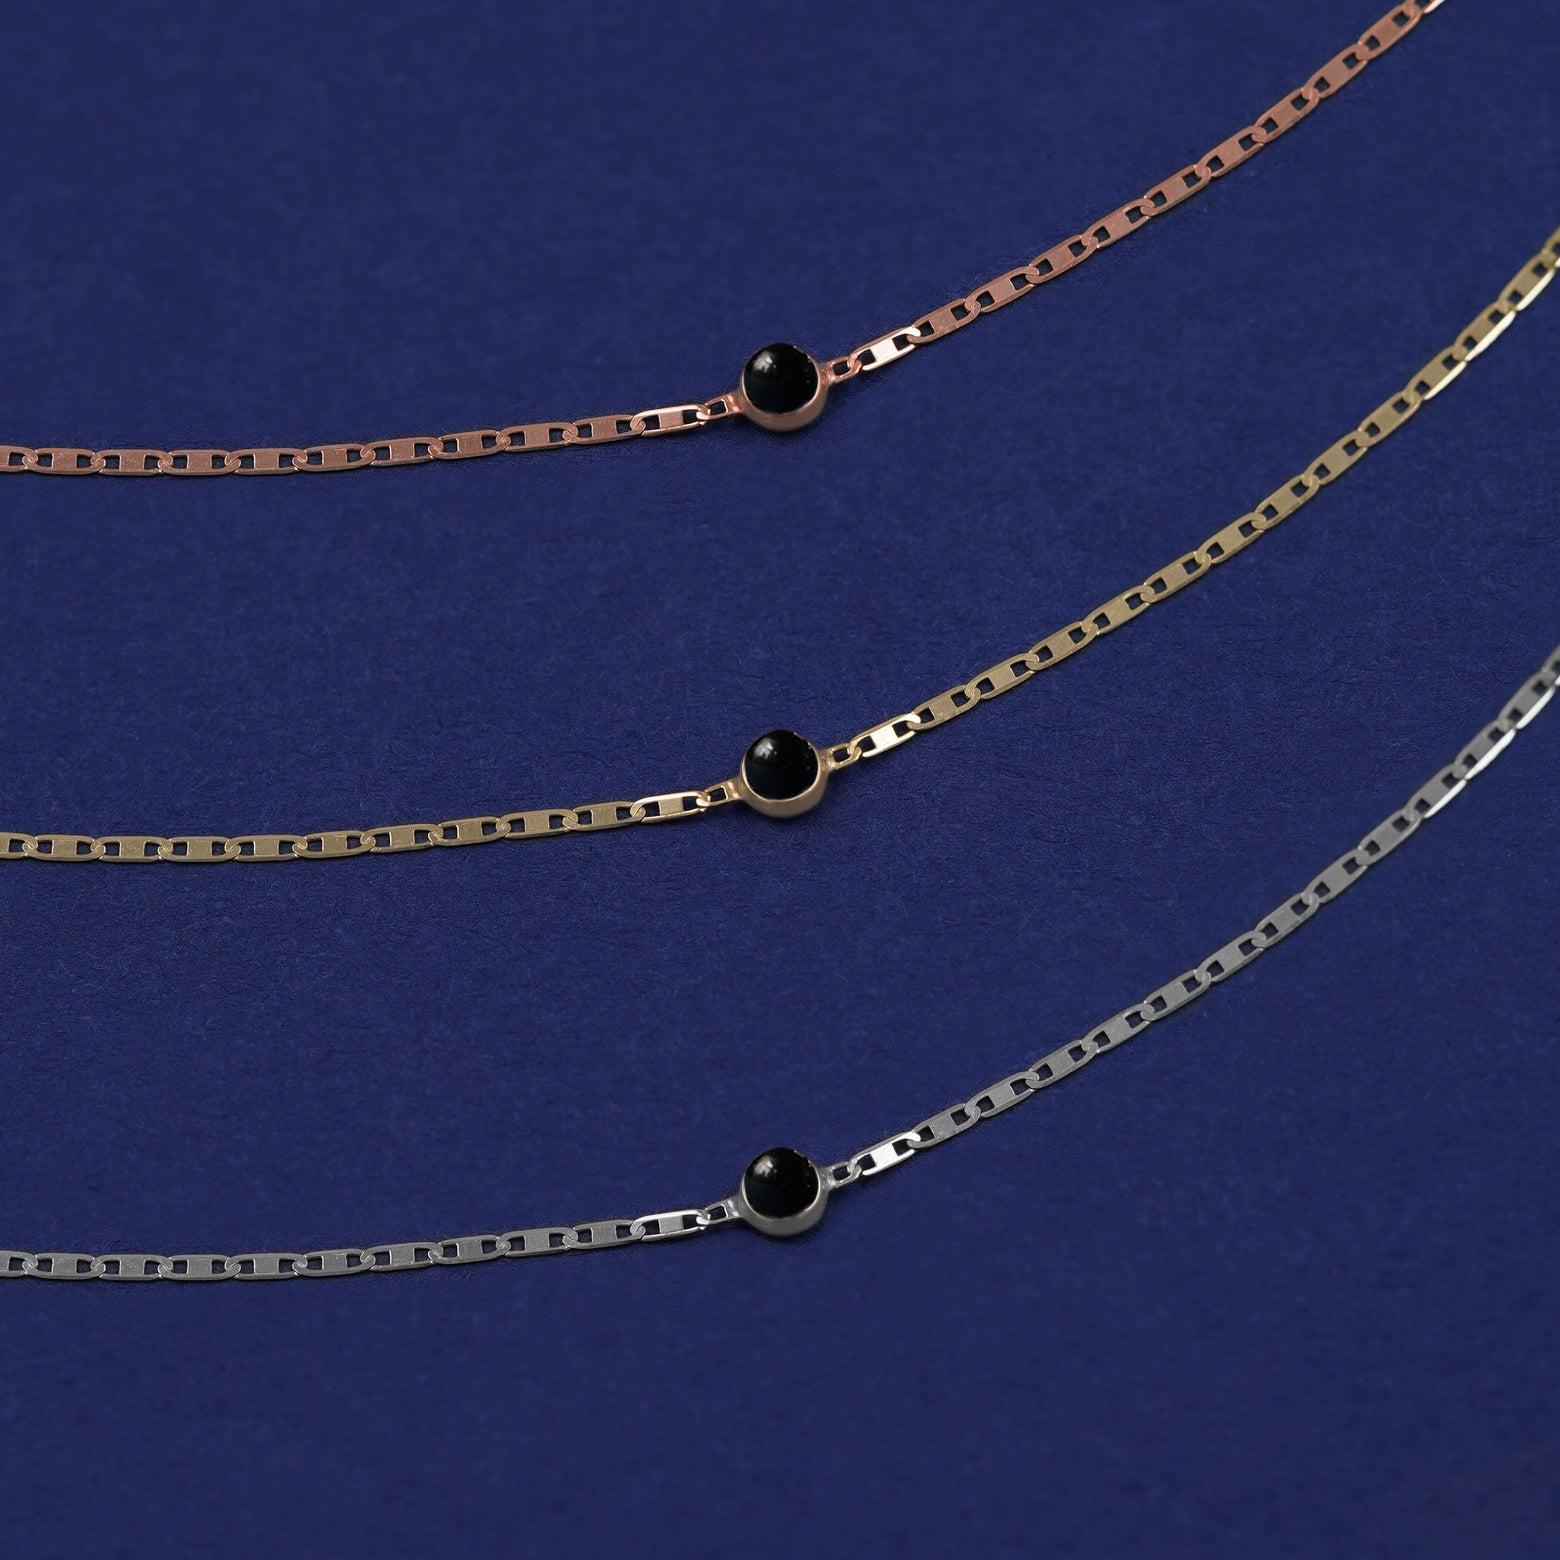 Three Onyx Bracelets shown in options of rose, yellow, and white gold